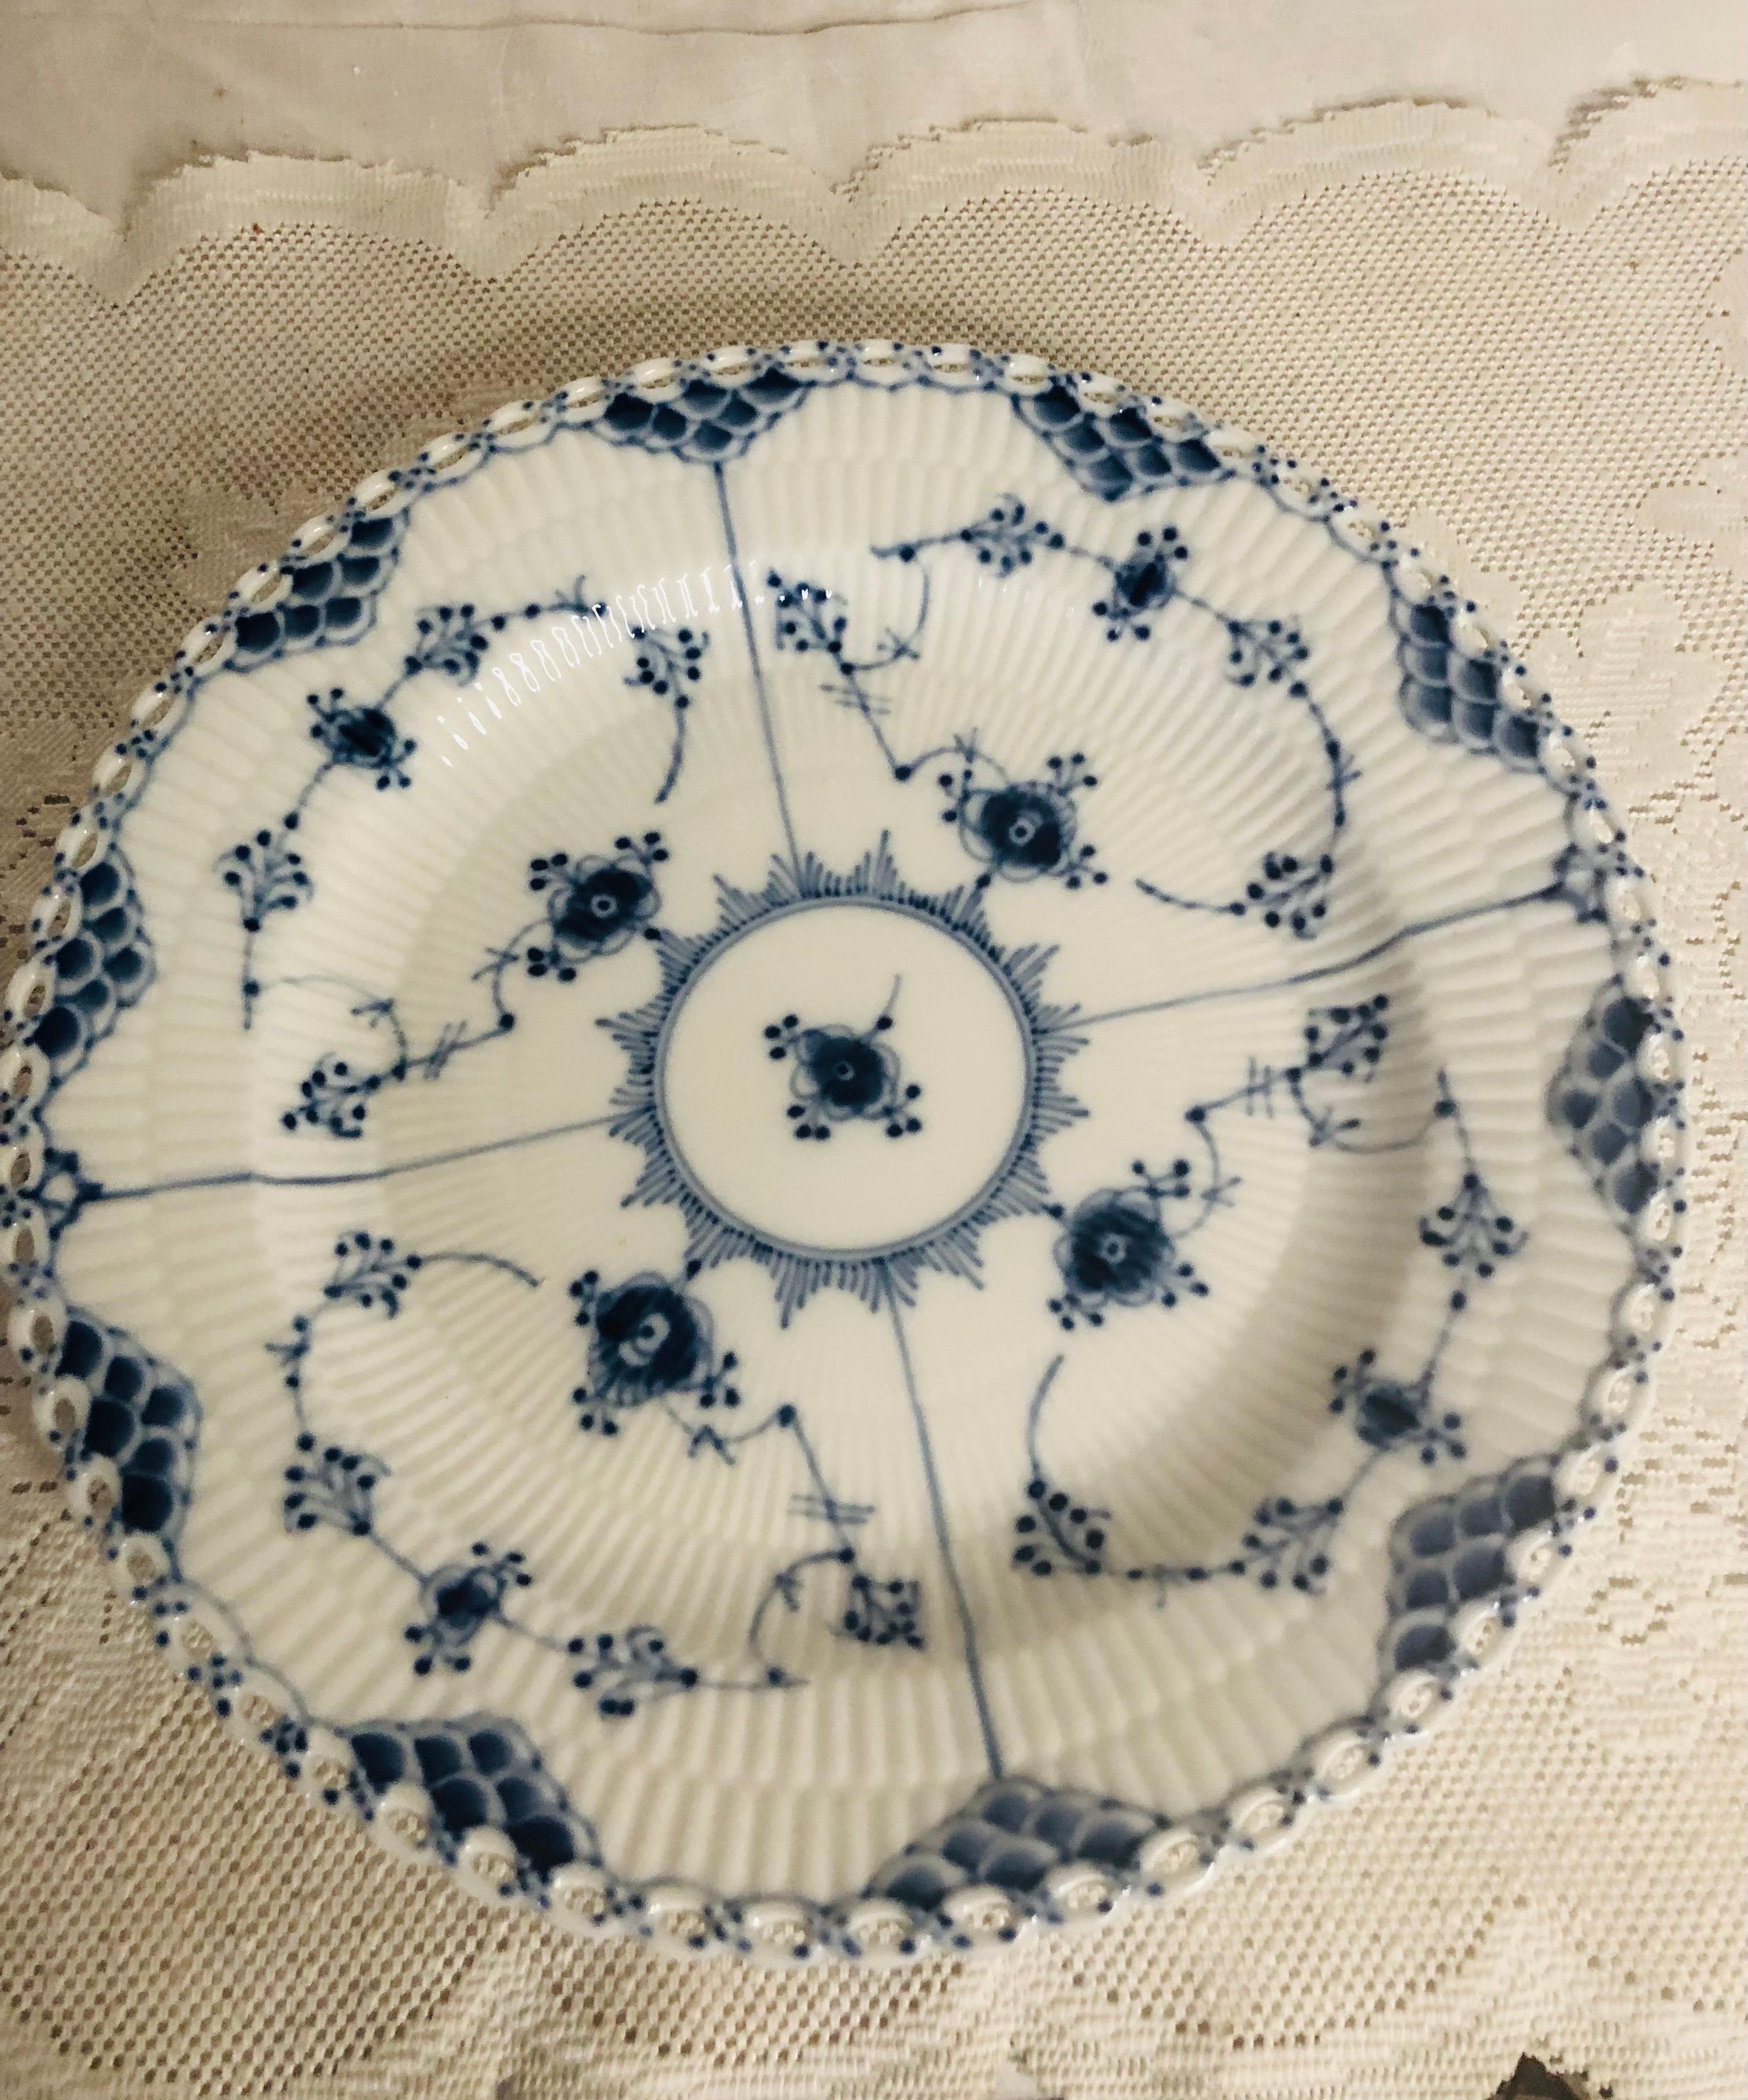 Set of 11 Royal Copenhagen Fluted Dinner Plates with Full Lace Openwork Design 4